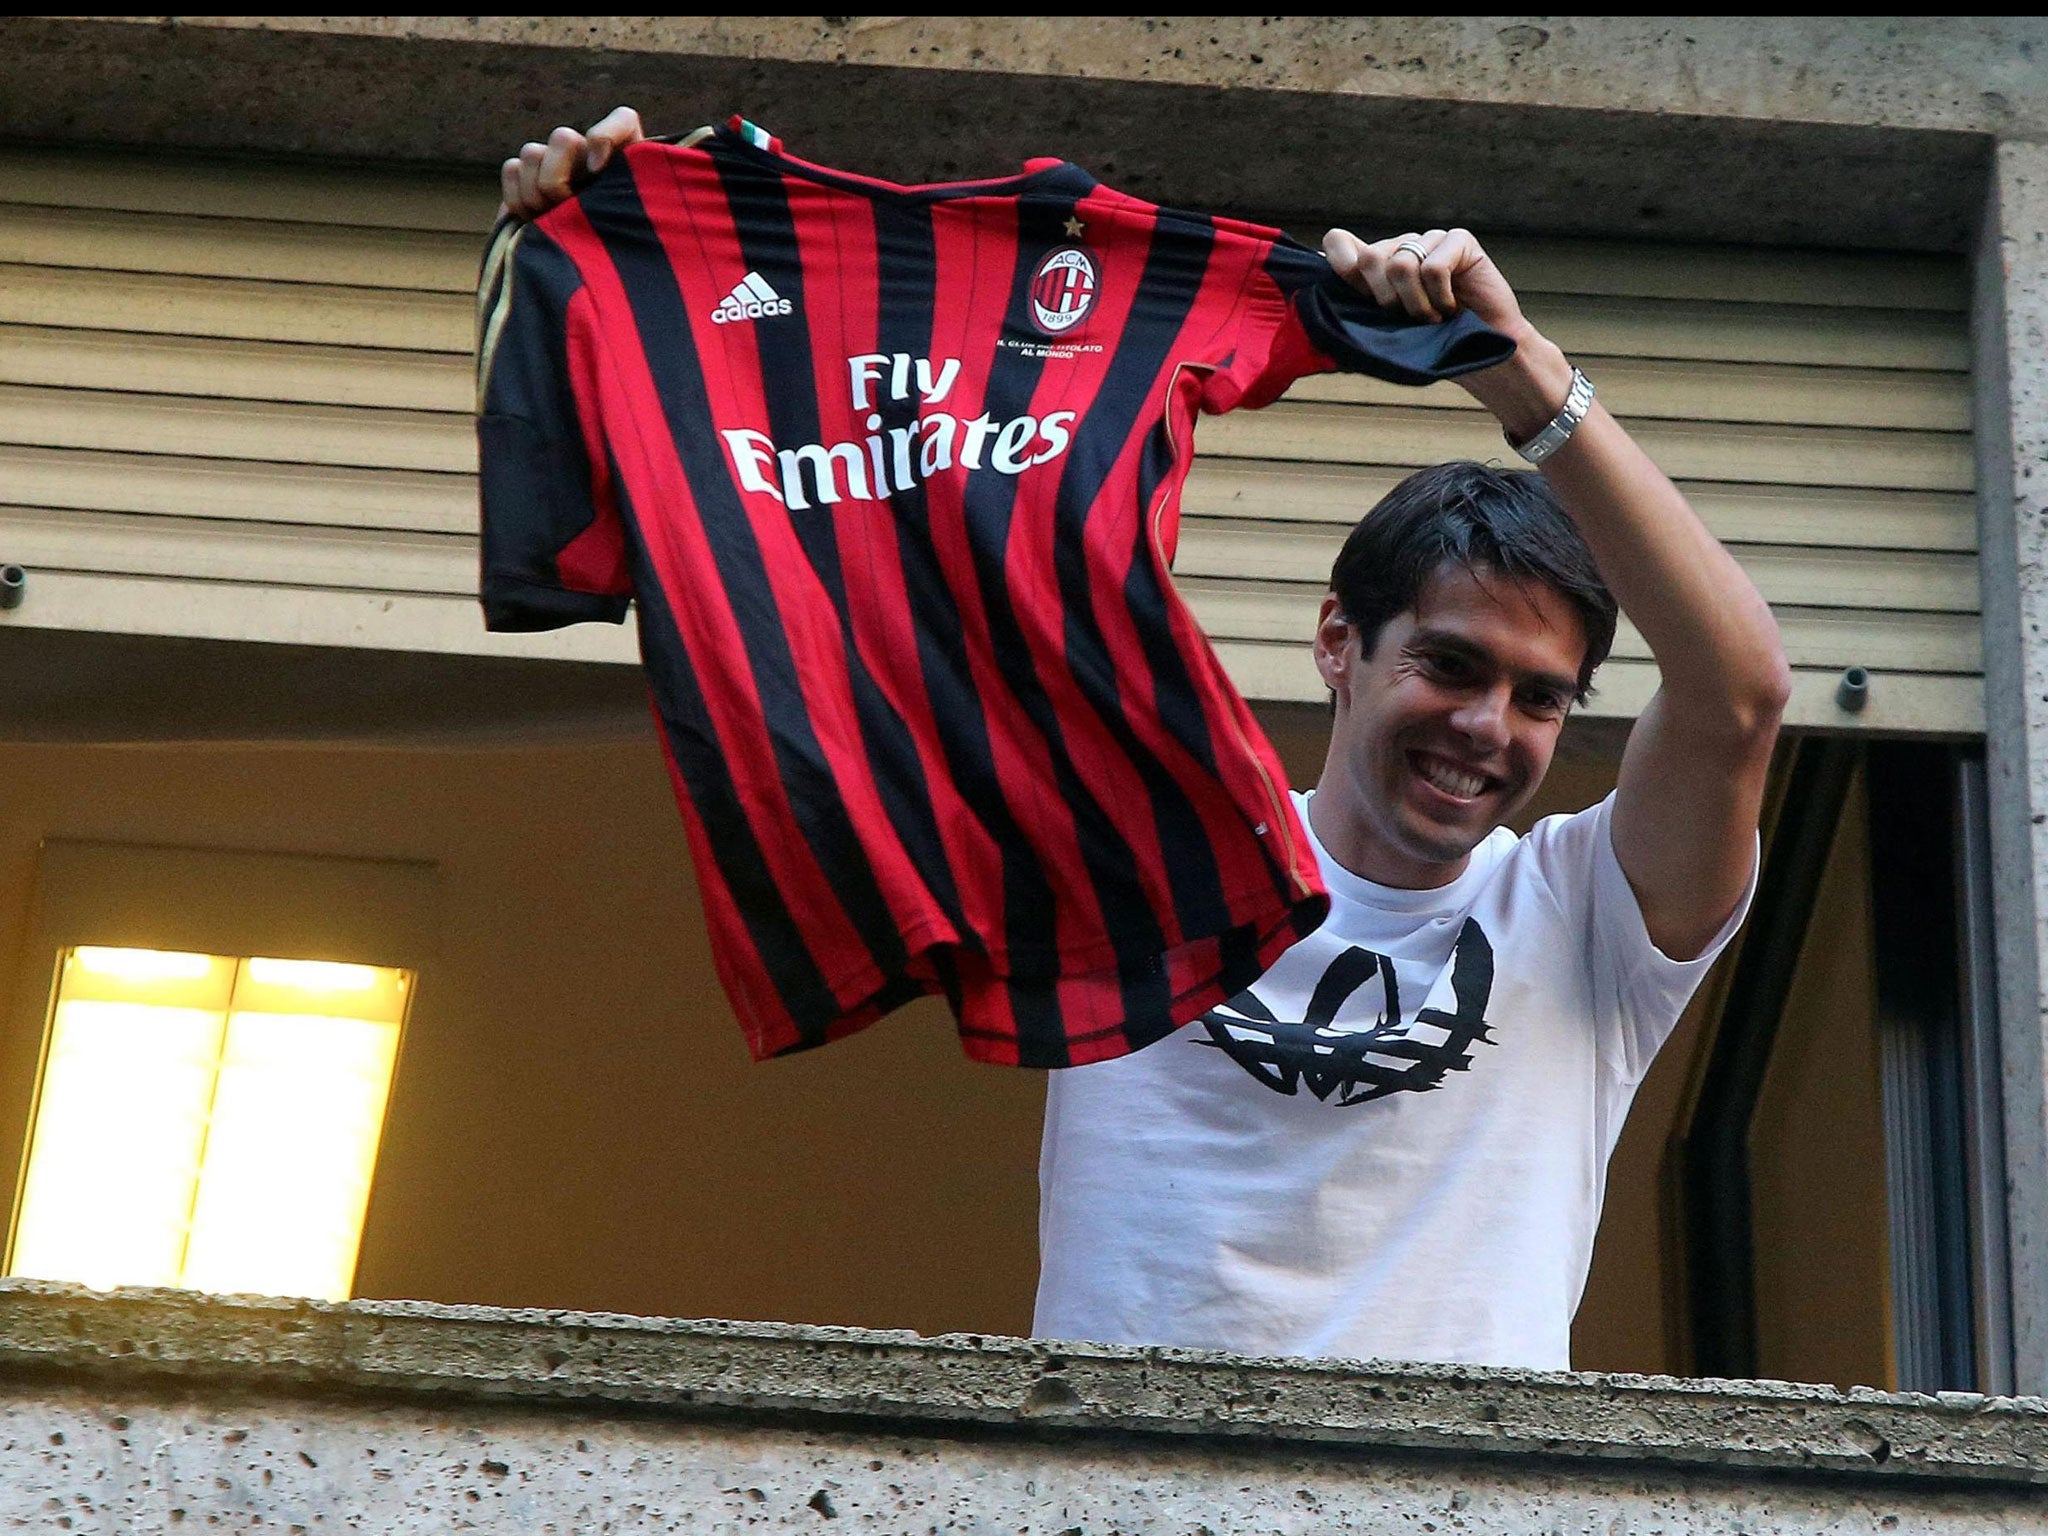 The Brazilian attacking midfielder Kaka has completed his return to Milan after four unhappy years at Real Madrid